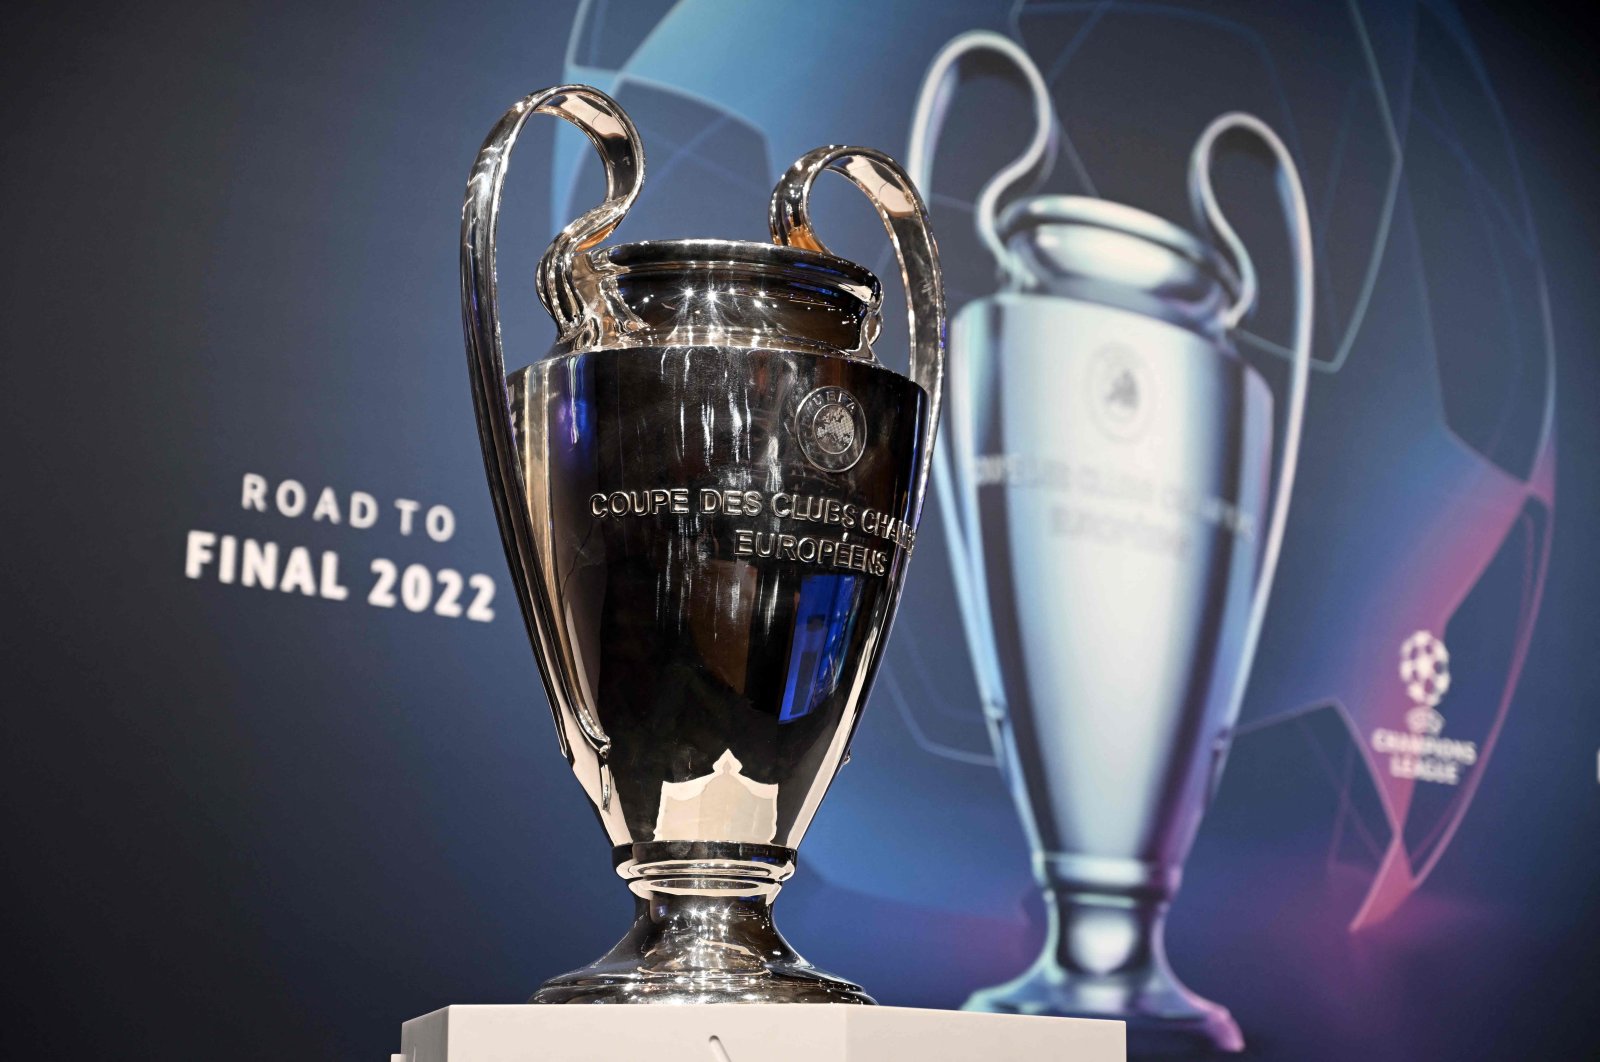 The UEFA Champions League trophy is seen ahead of the draw for the 2022 quarterfinals, semifinals and final, Nyon, Switzerland, March 18, 2022. (AFP Photo)